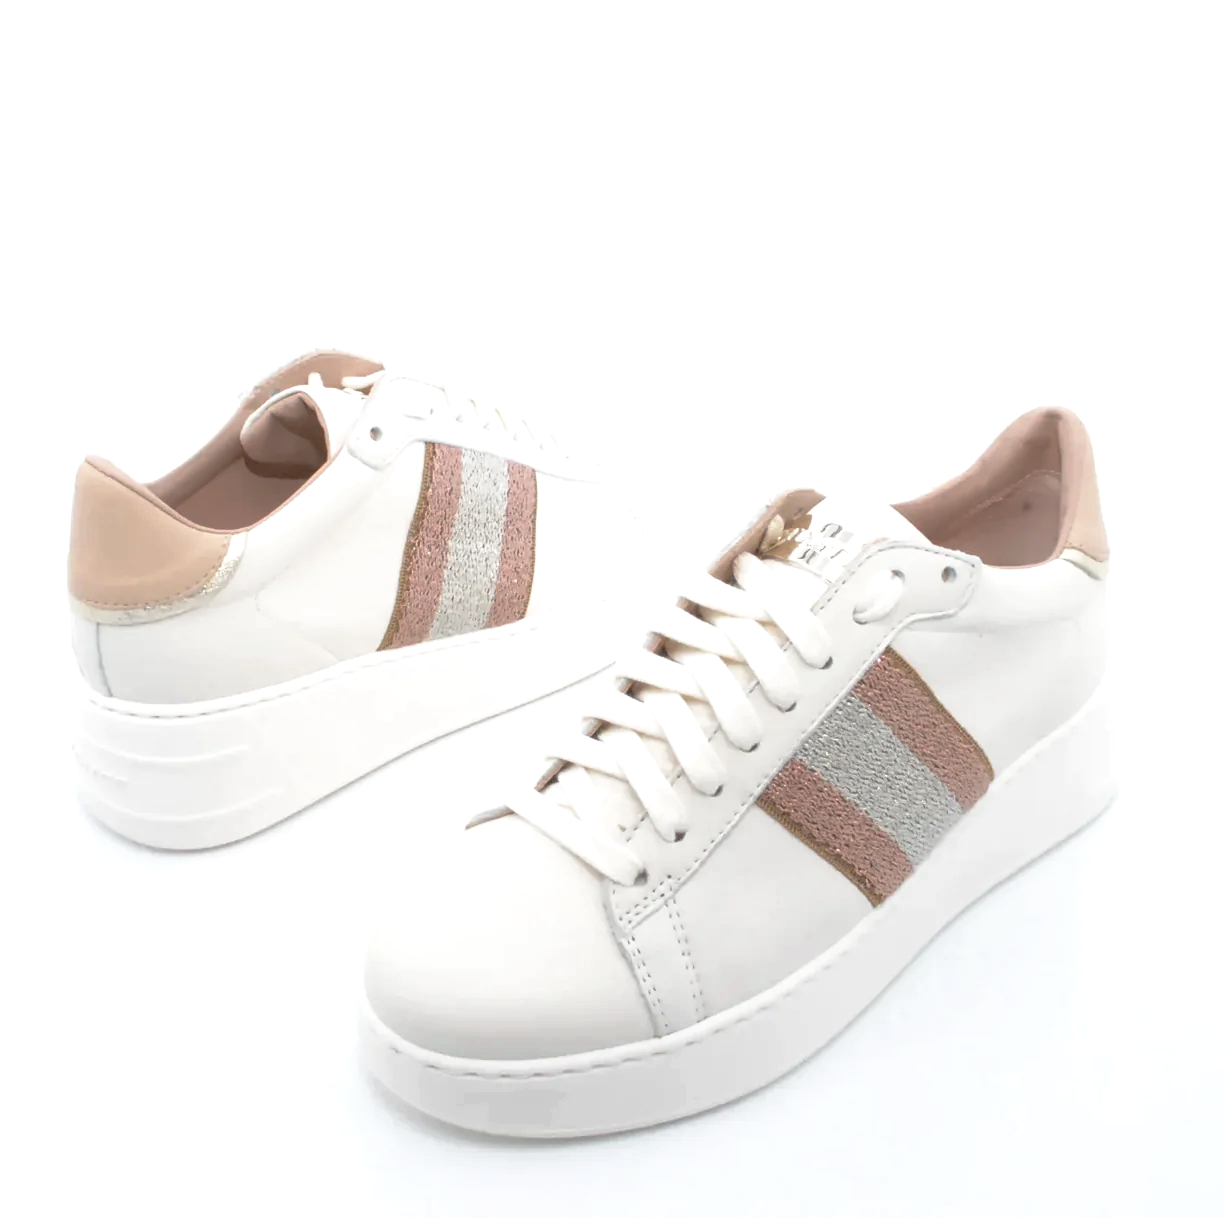 sneakers-stokton-in-pelle-sneakers-2_e1b2b5fa-81ca-4d6a-8530-3caaf5cfdf60.png